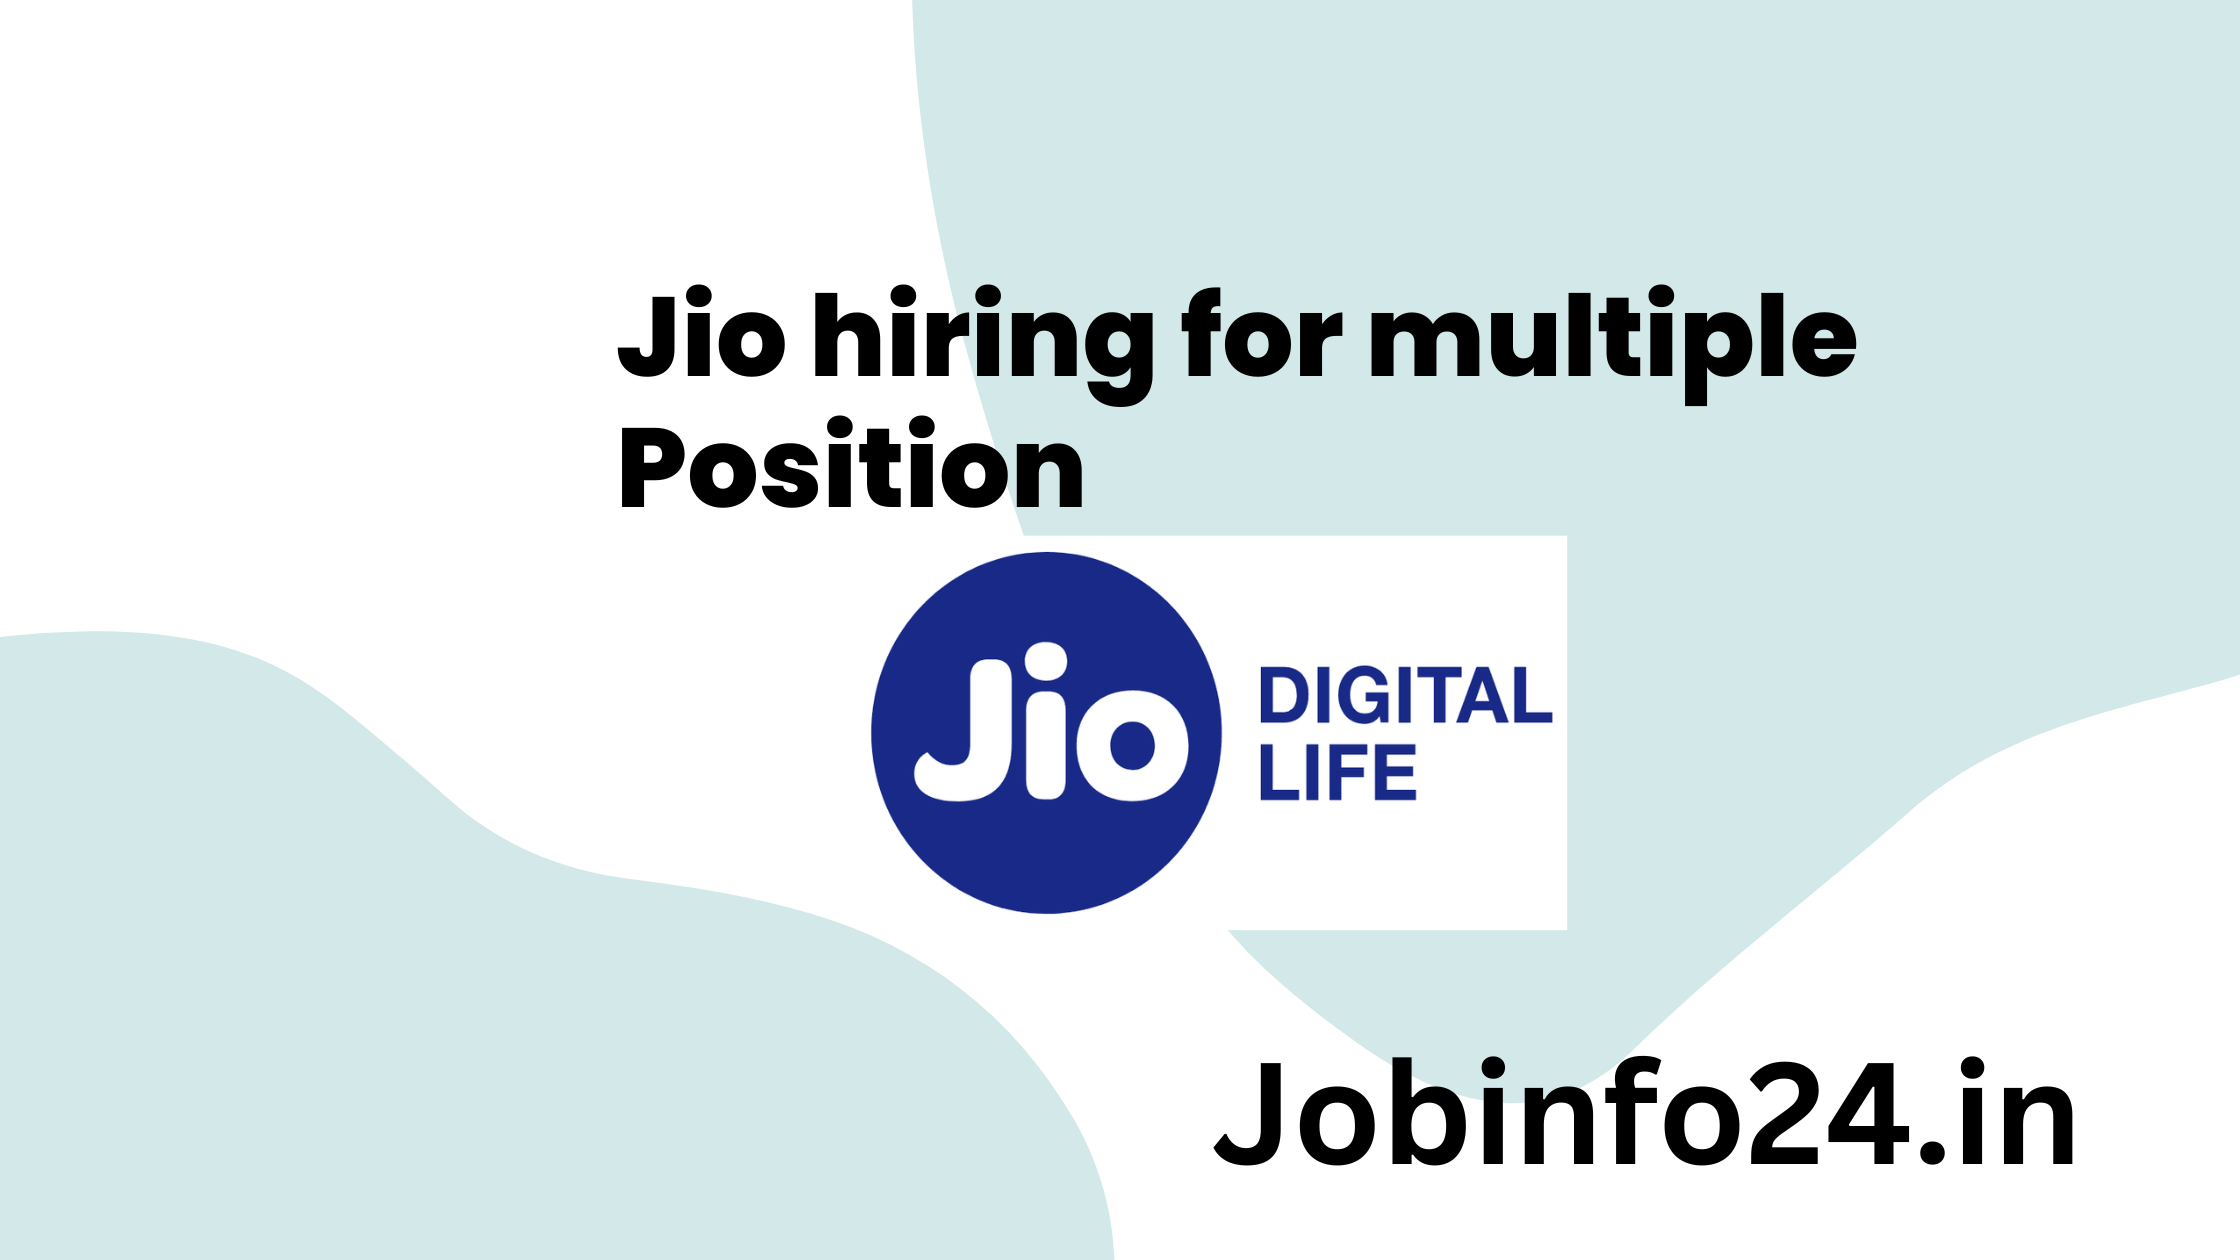 Jio hiring for multiple Position